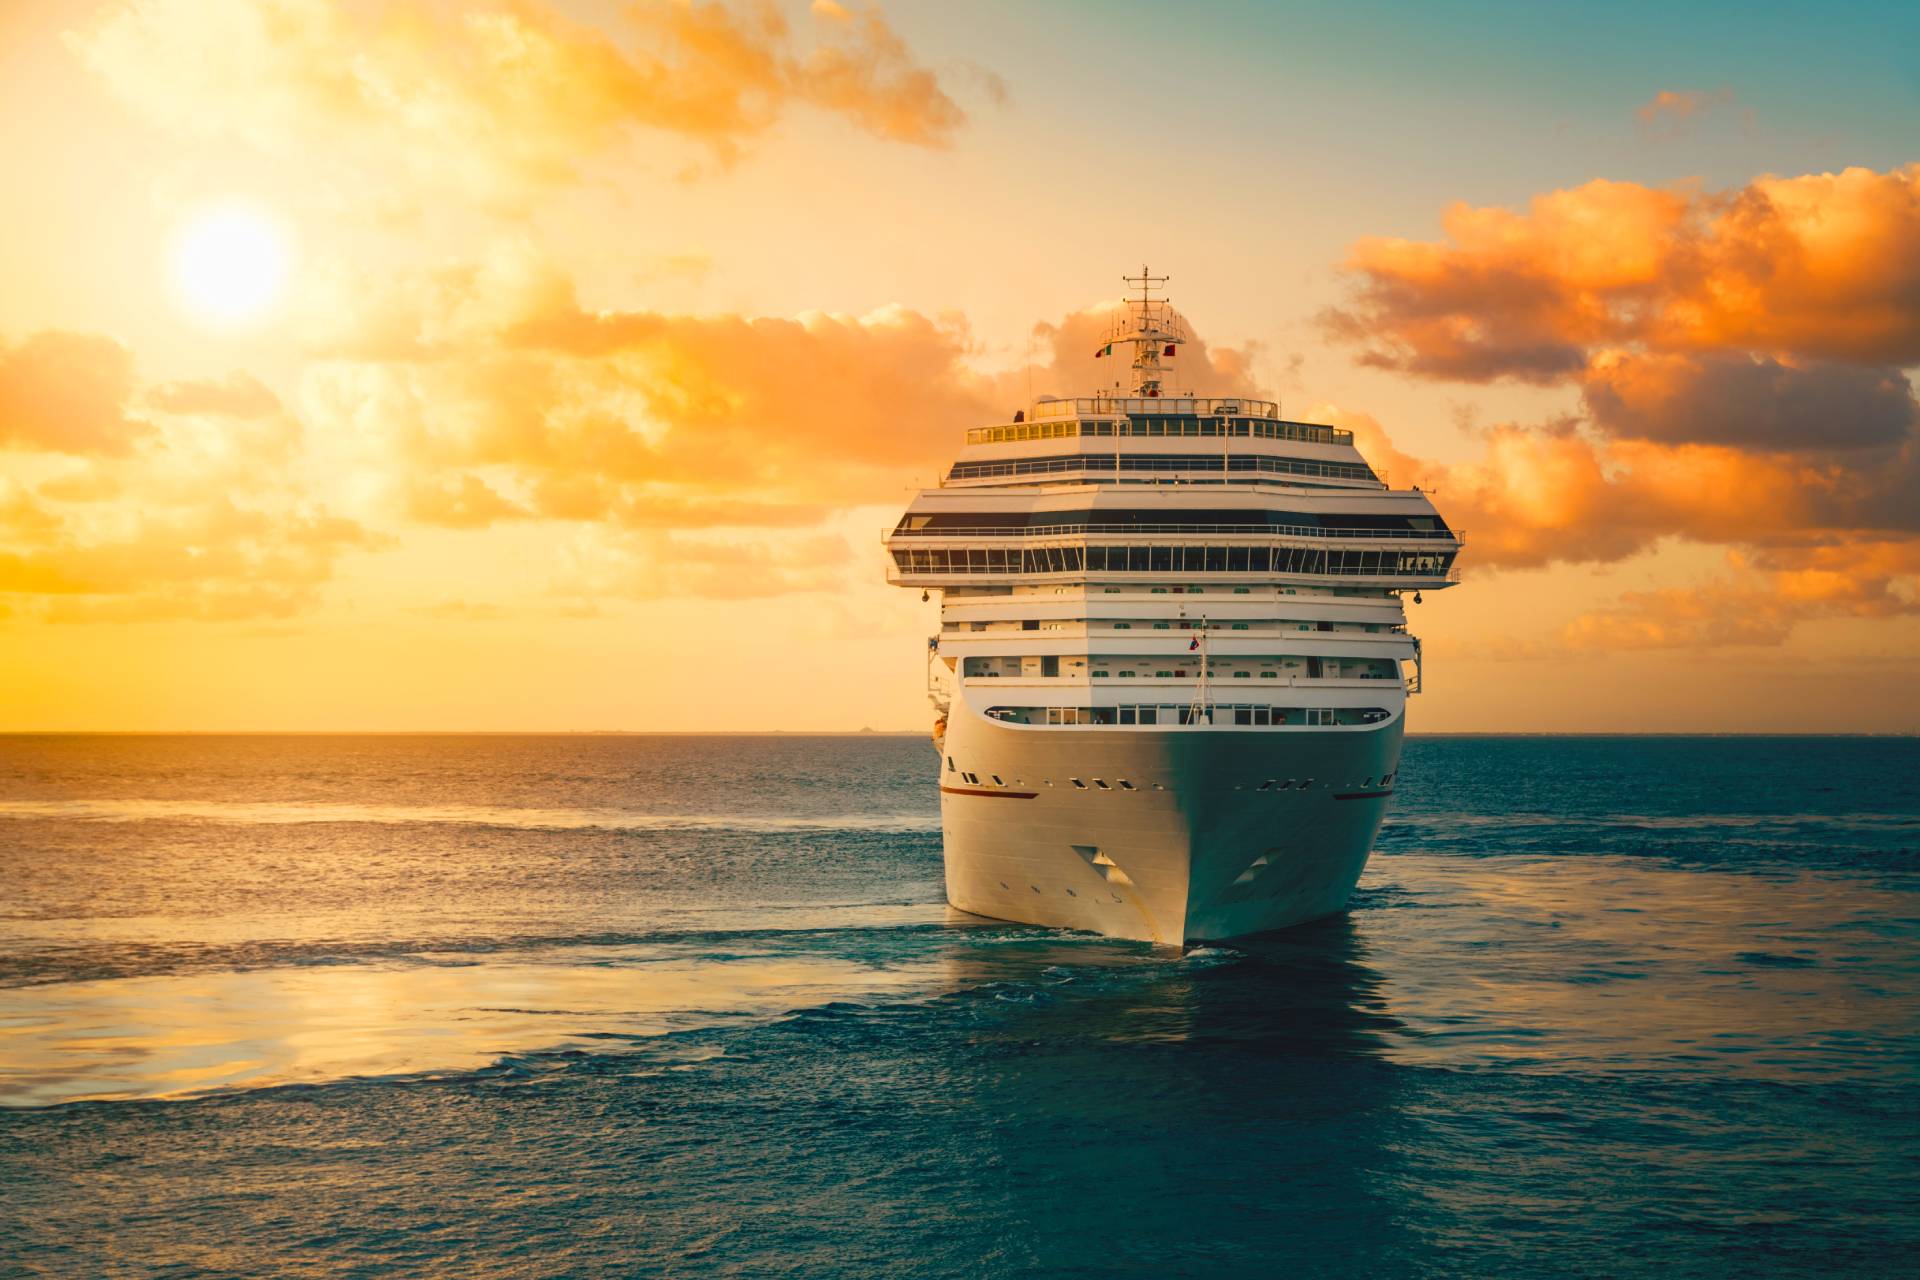 Cruise ship on the ocean during sunset